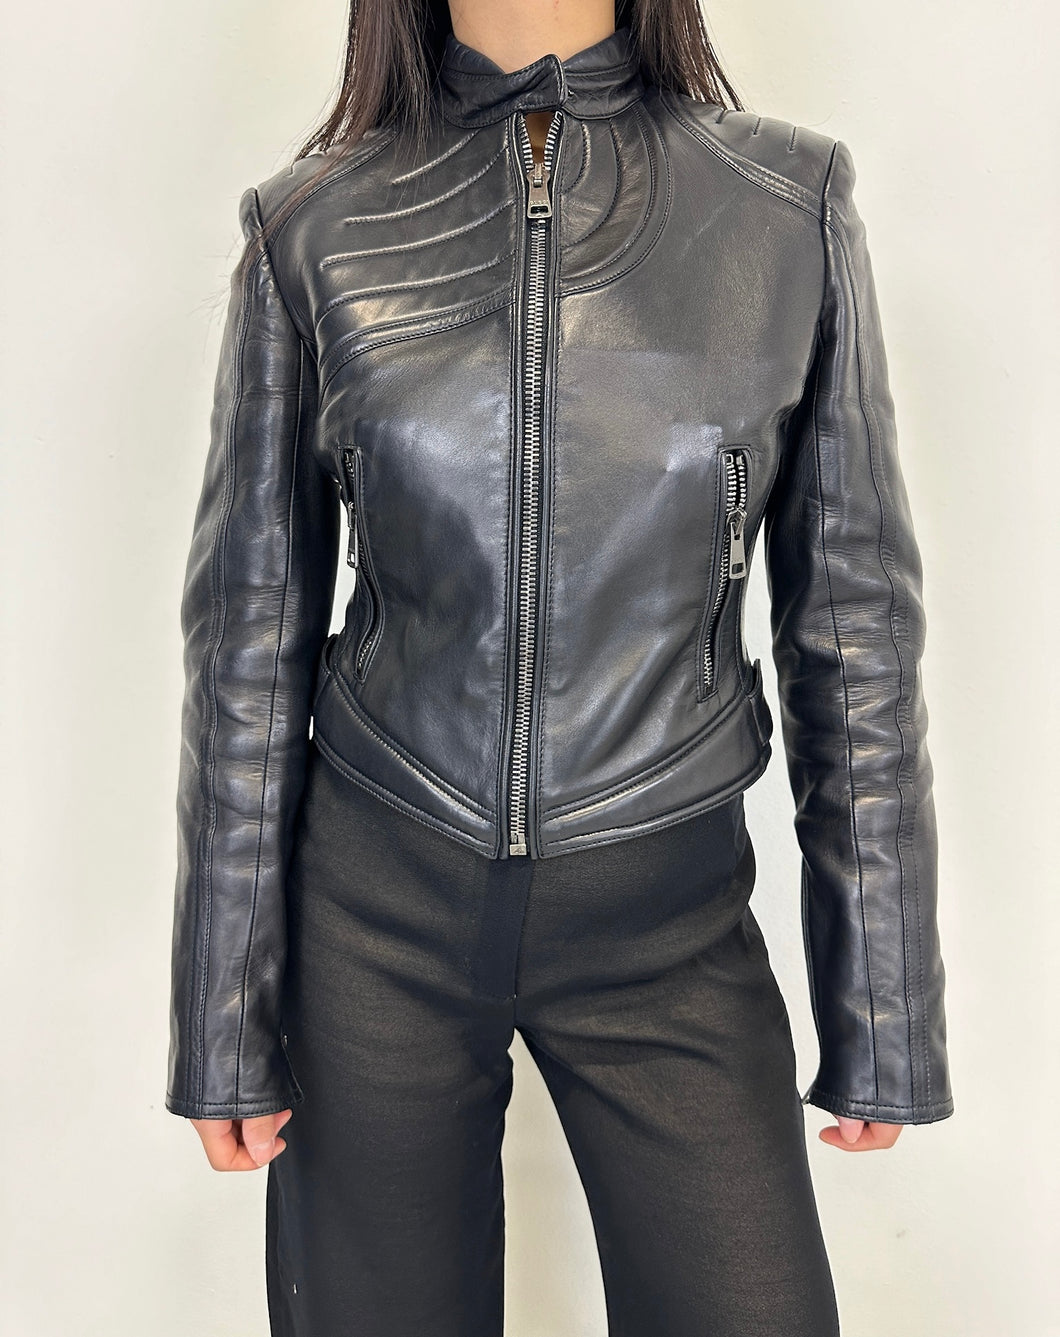 AW2000 Gucci by Tom Ford spiral biker leather jacket